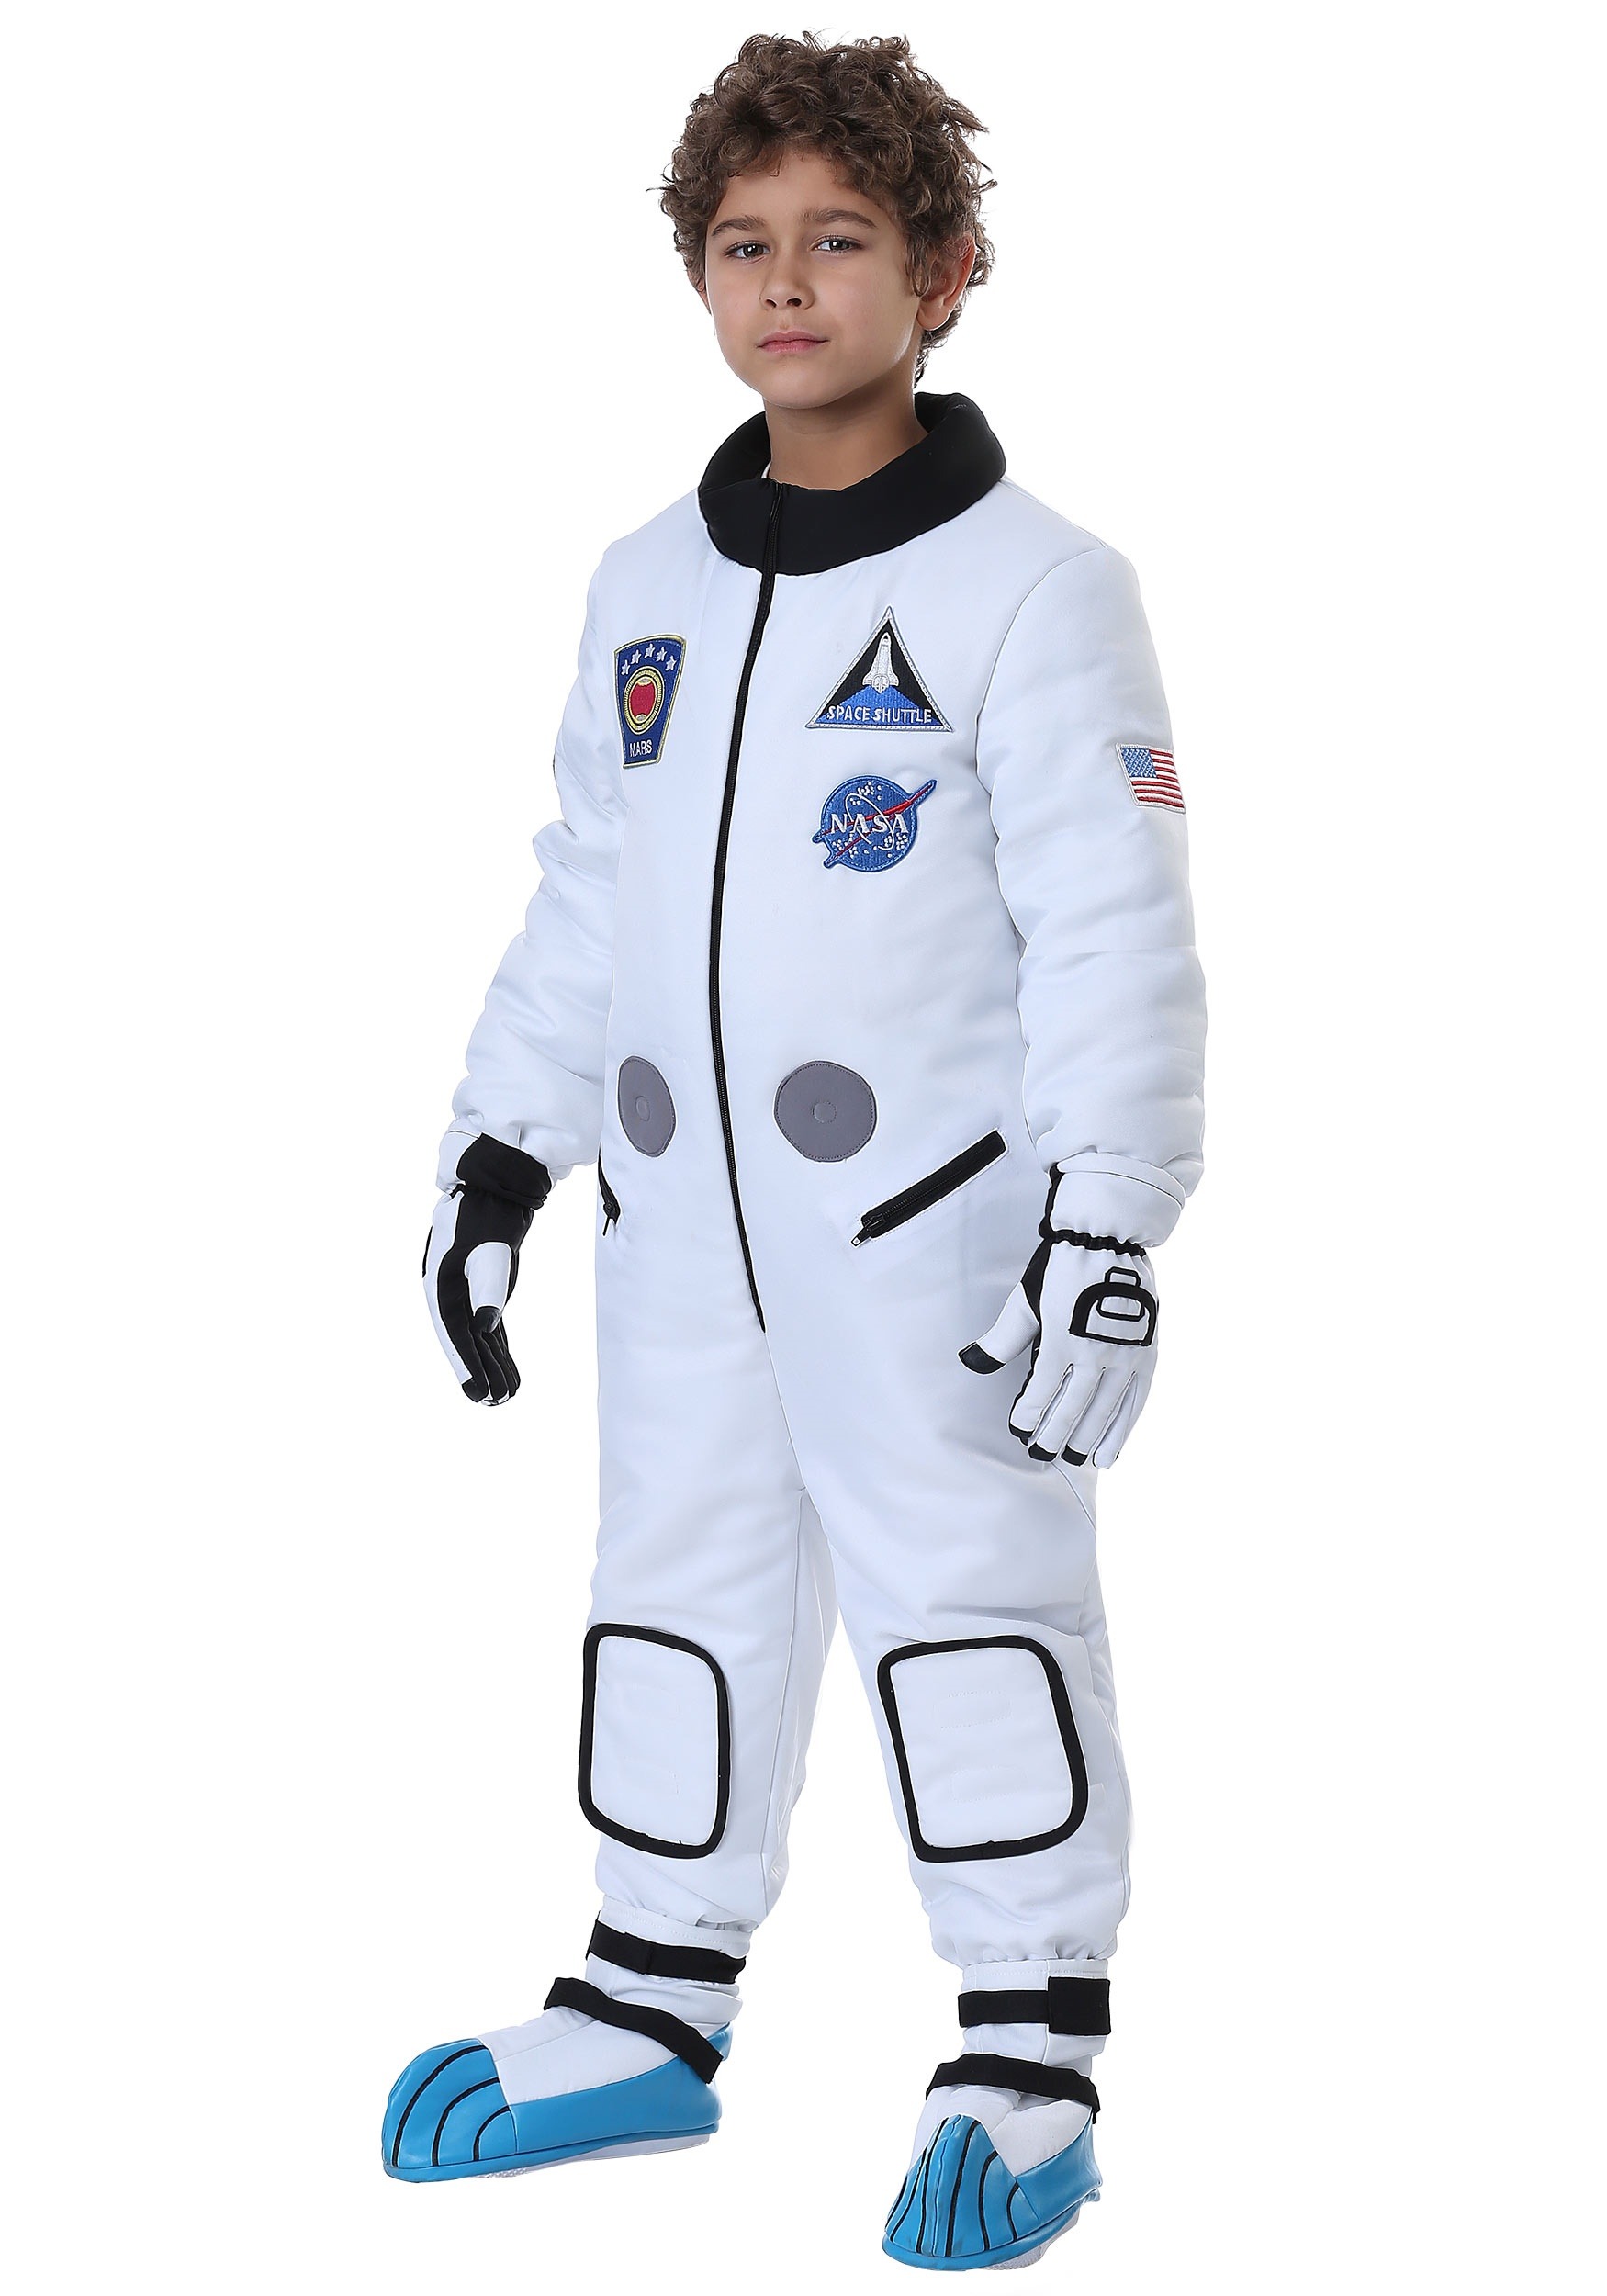 Deluxe Astronaut Costume for a Child